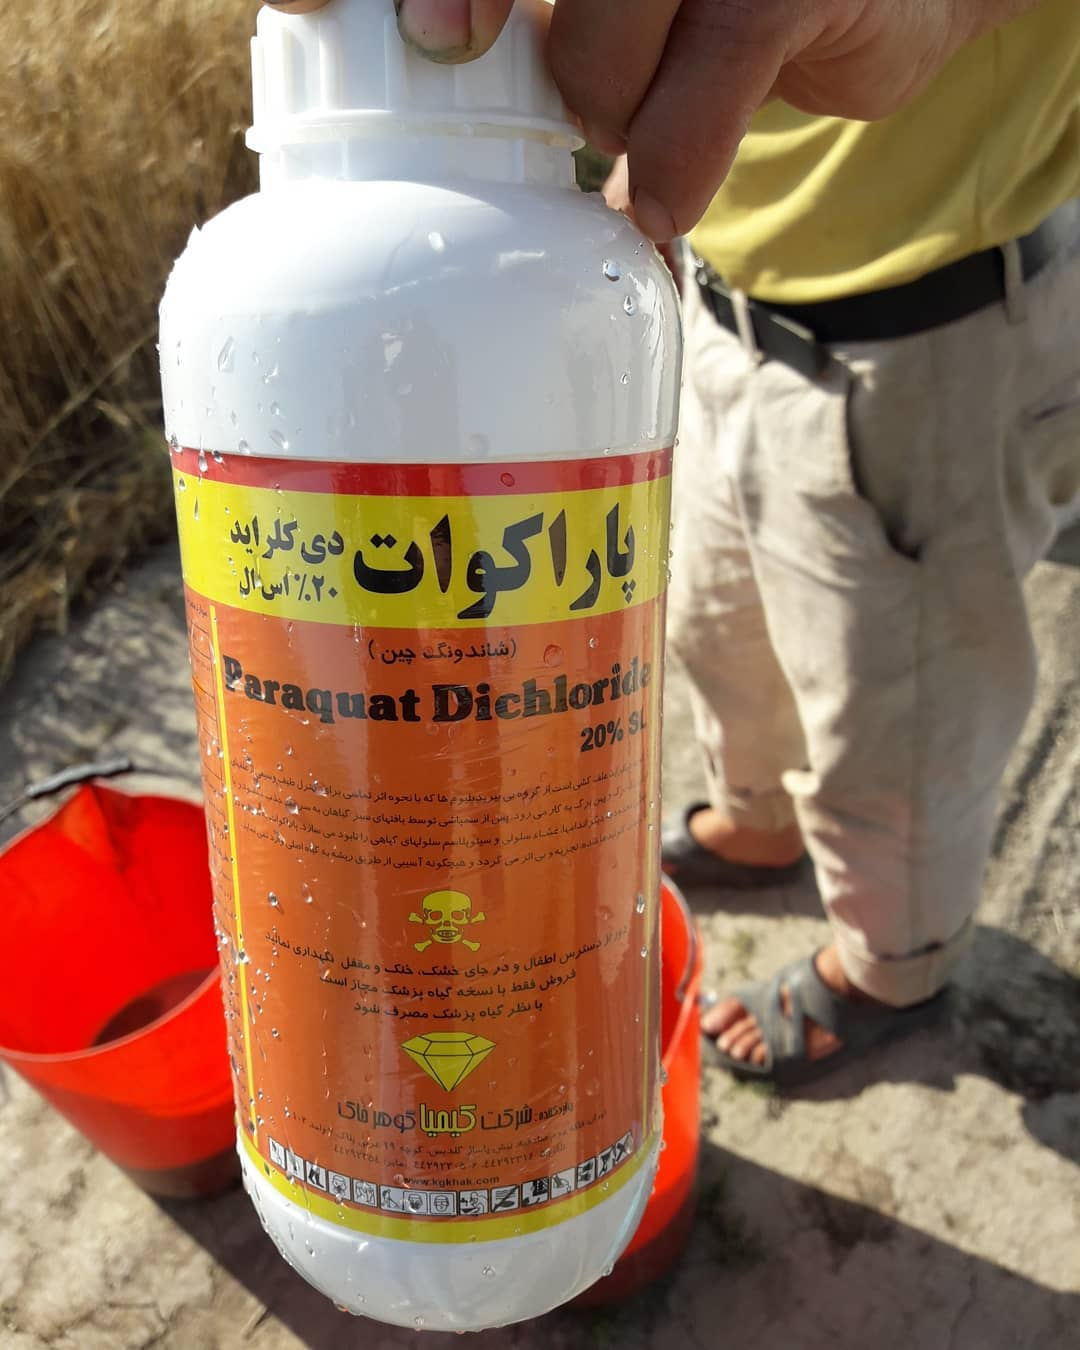 Paraquat (herbicide) is used to dry and kill weeds in Iran-drone agriculture sprayer, agriculture drone sprayer, sprayer drone, UAV crop duster